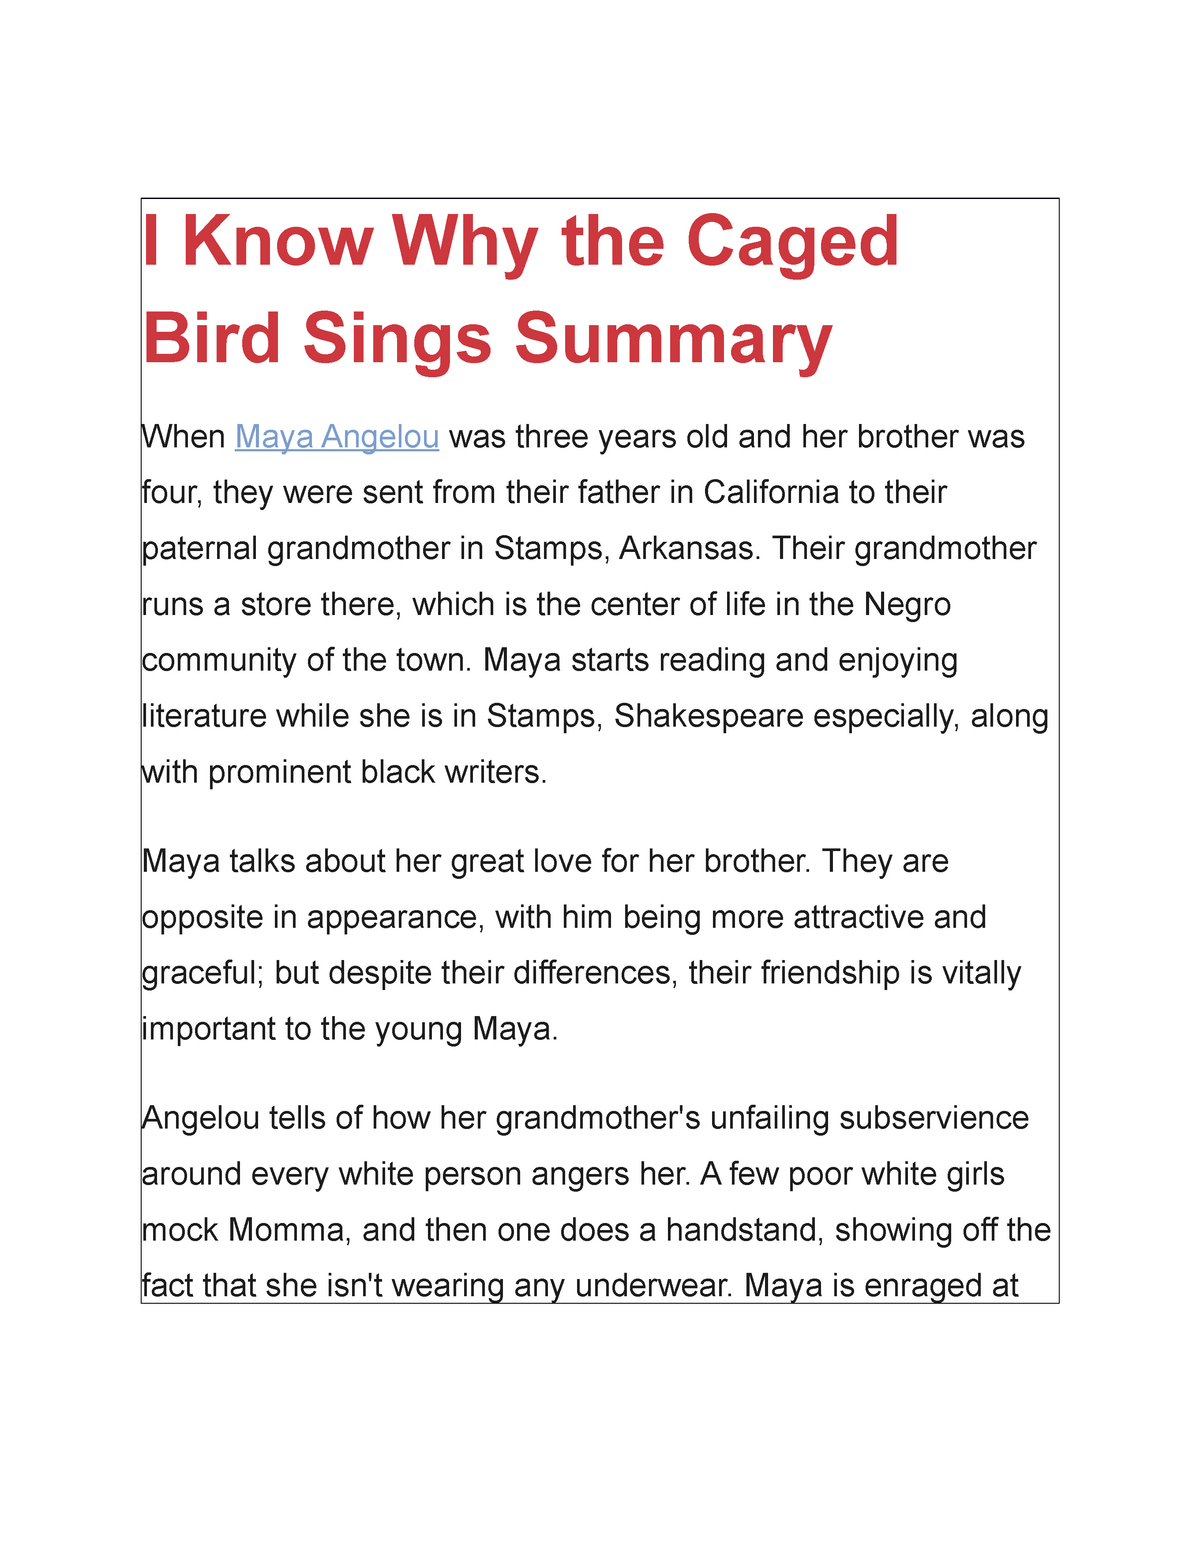 I know why the caged bird sings poem analysis essay Summary I Know Why The Caged Bird Sings 2 Studocu